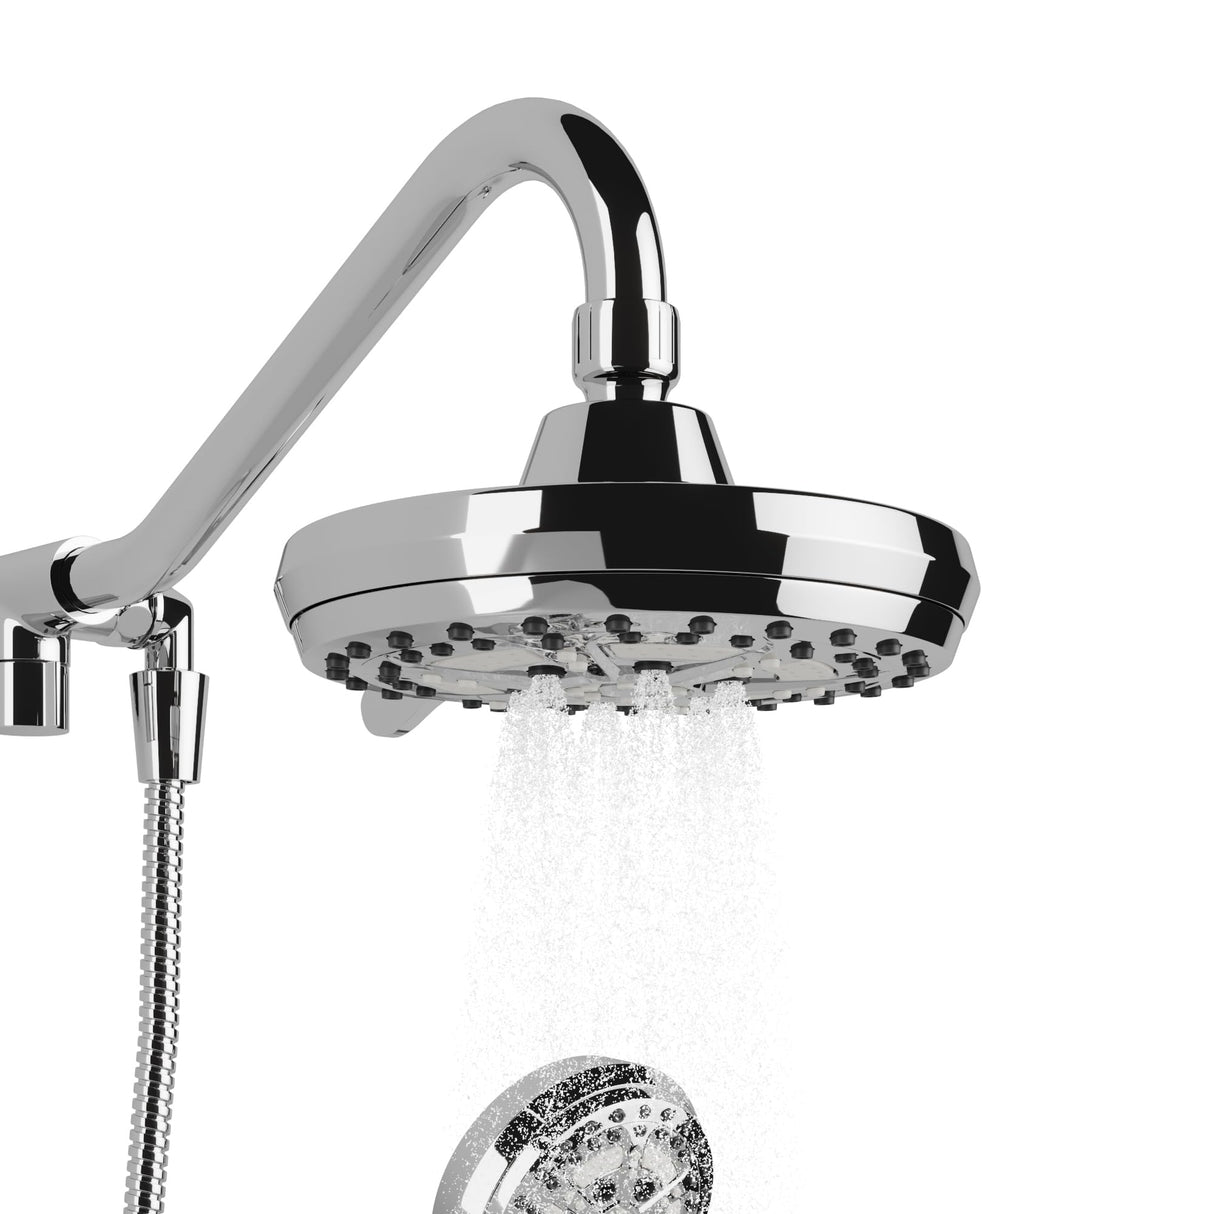 PULSE ShowerSpas 1053-CH Oasis Shower System with 5-Function 7" Showerhead, 6-Function Hand Shower, Polished Chrome Finish